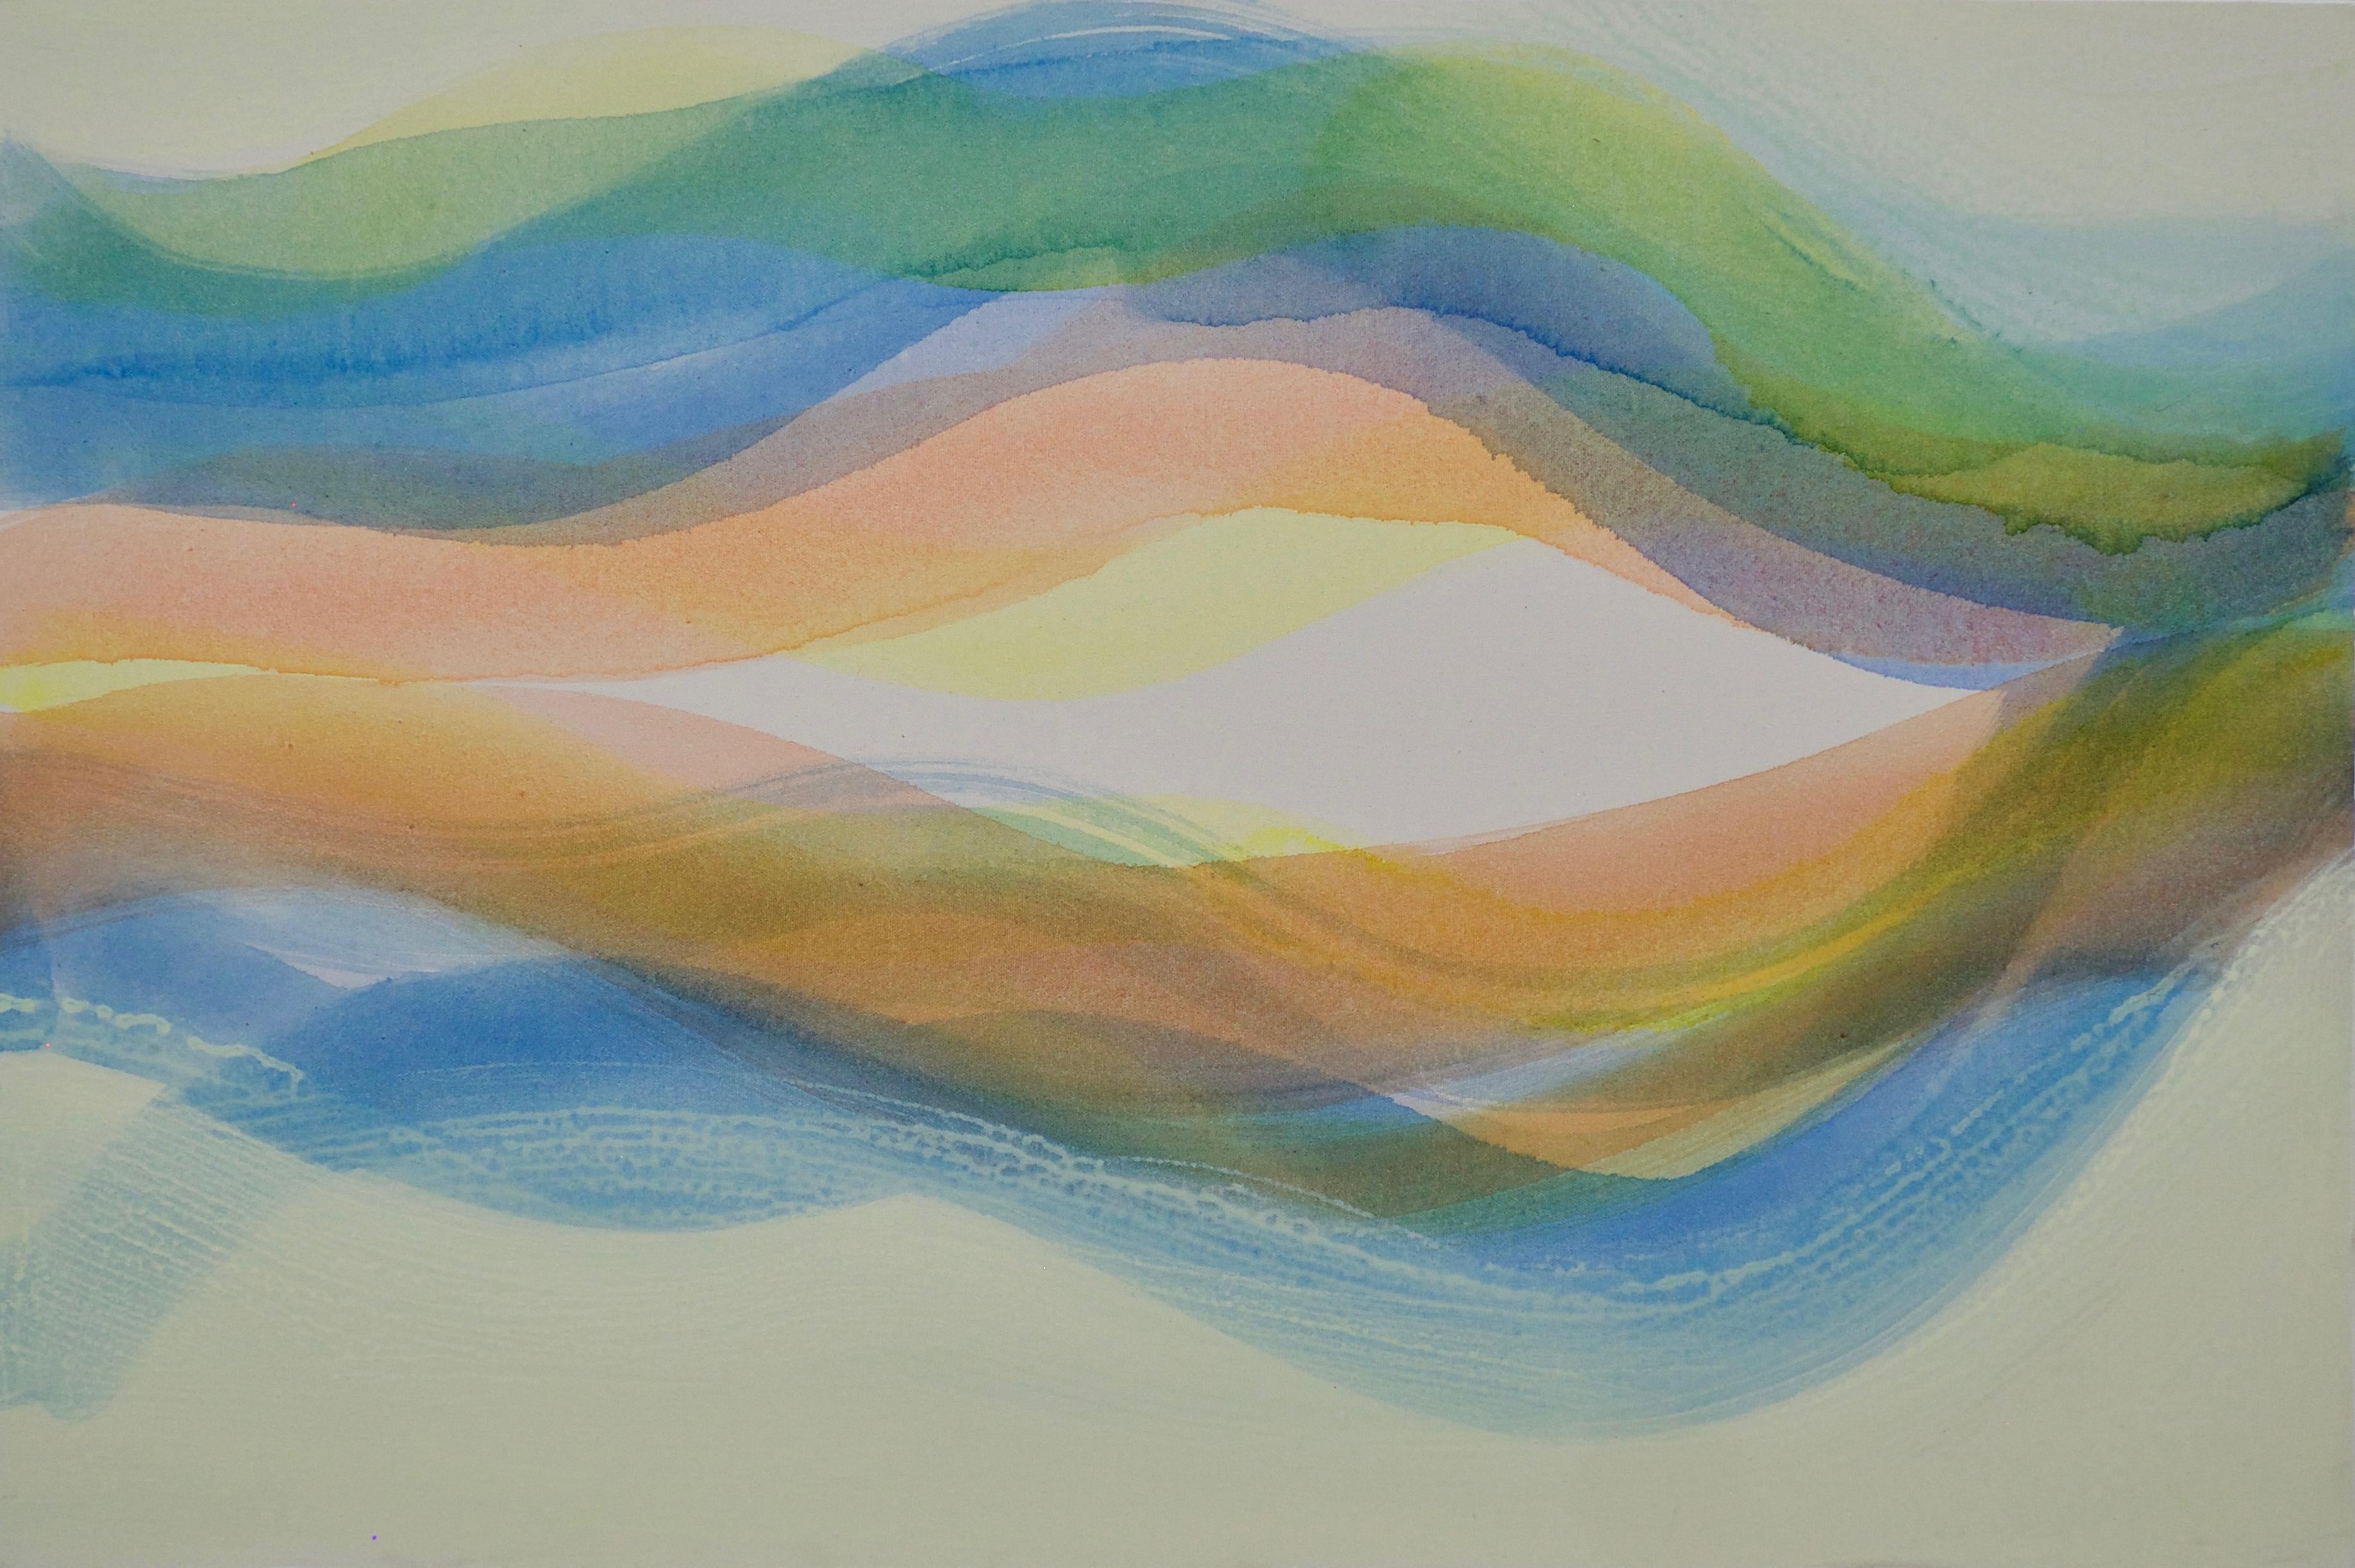 Margaret Neill Abstract Painting - Locale, Blue, Light Peach Orange, Green, Soft Yellow Undulations, Color Waves